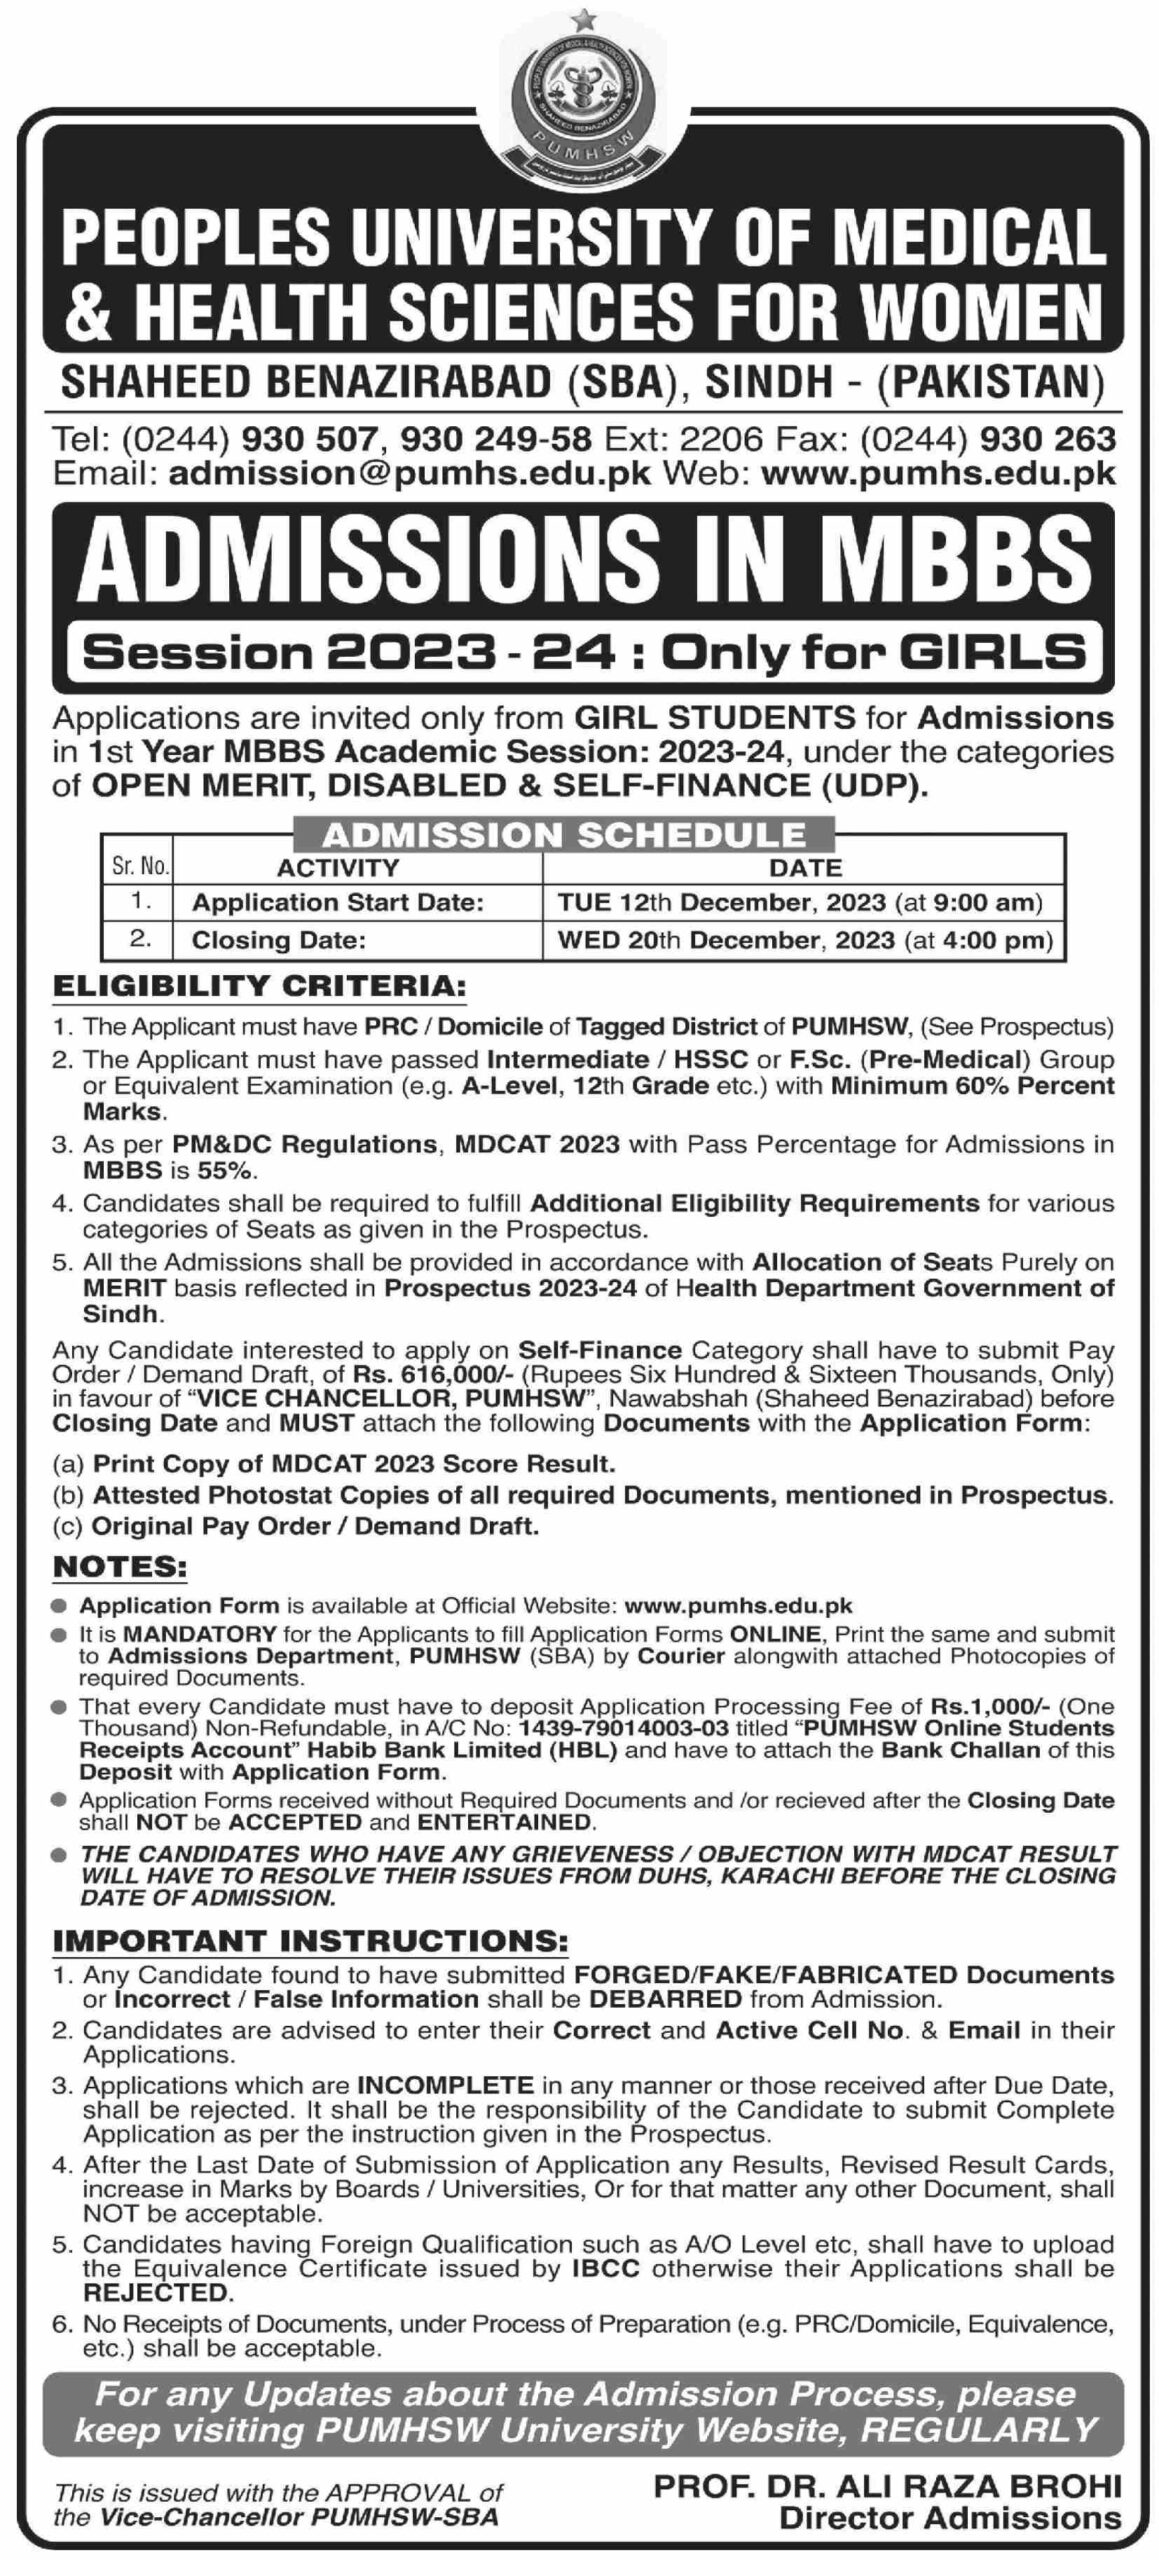 Peoples University of Medical And Health Sciences For Women Shaheed Benazirabad Sindh Pakistan Admissions in MBBS